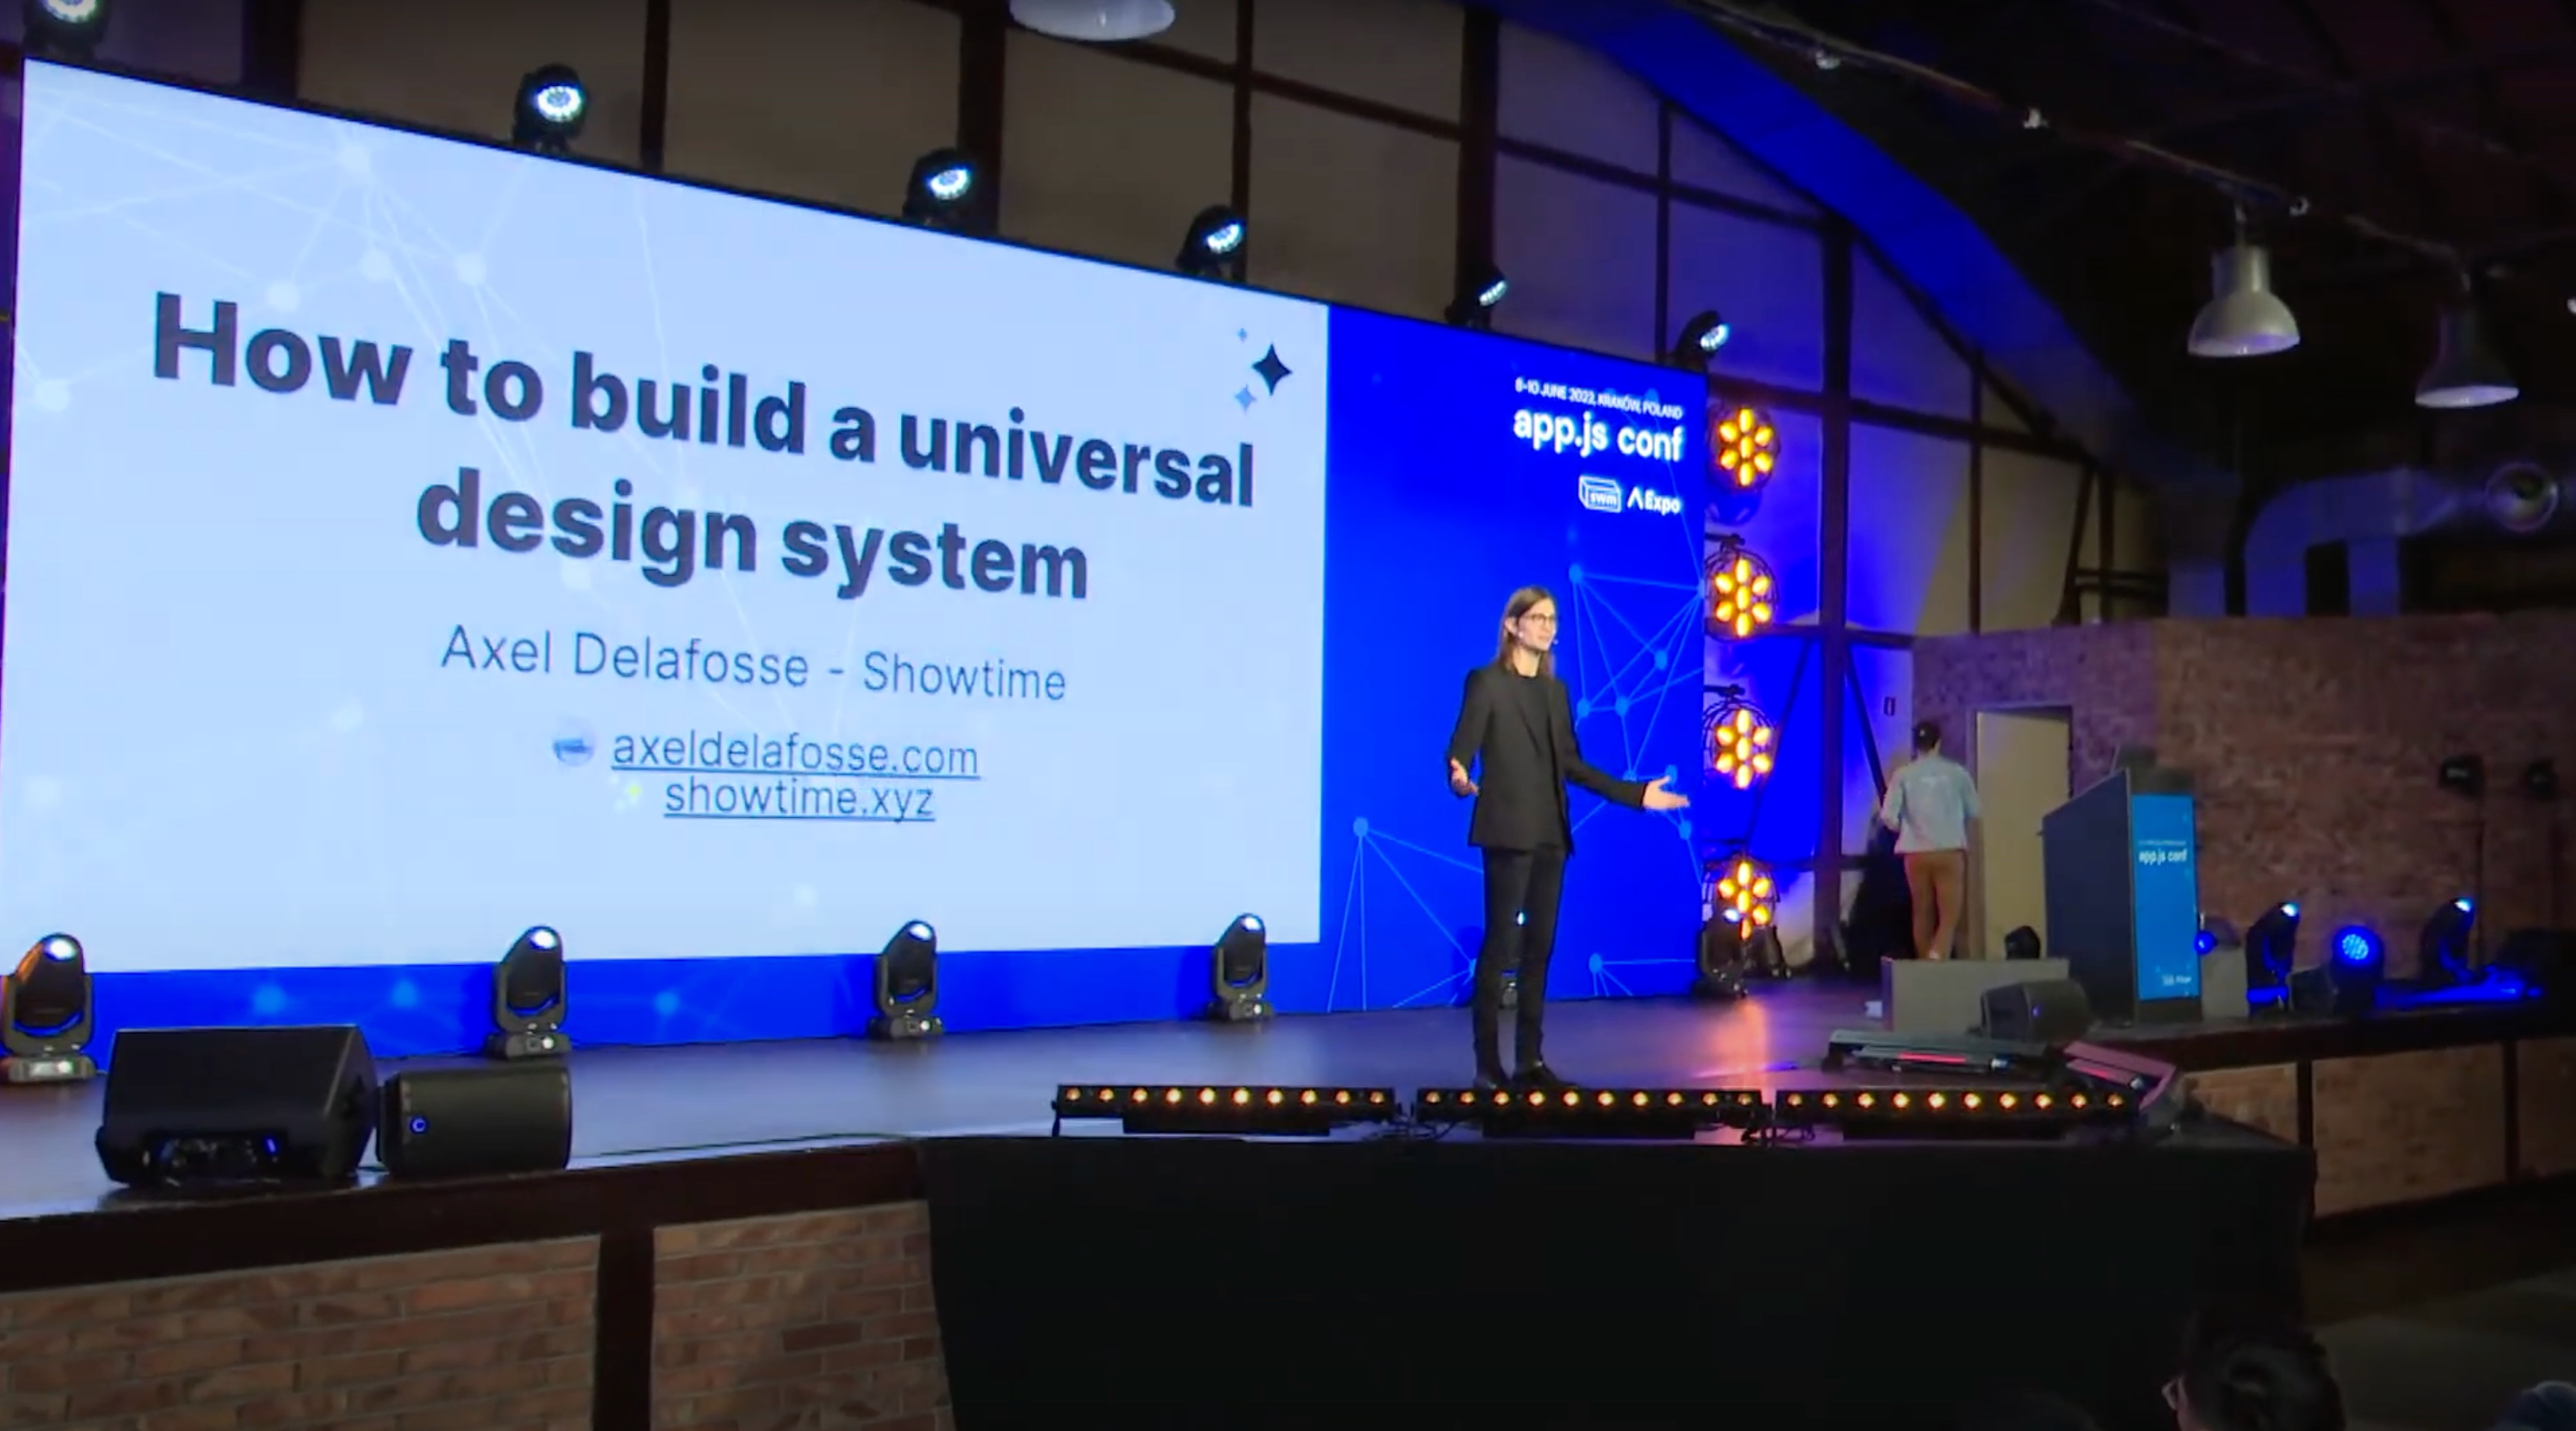 How to build a universal design system, Axel Delafosse at App.js.